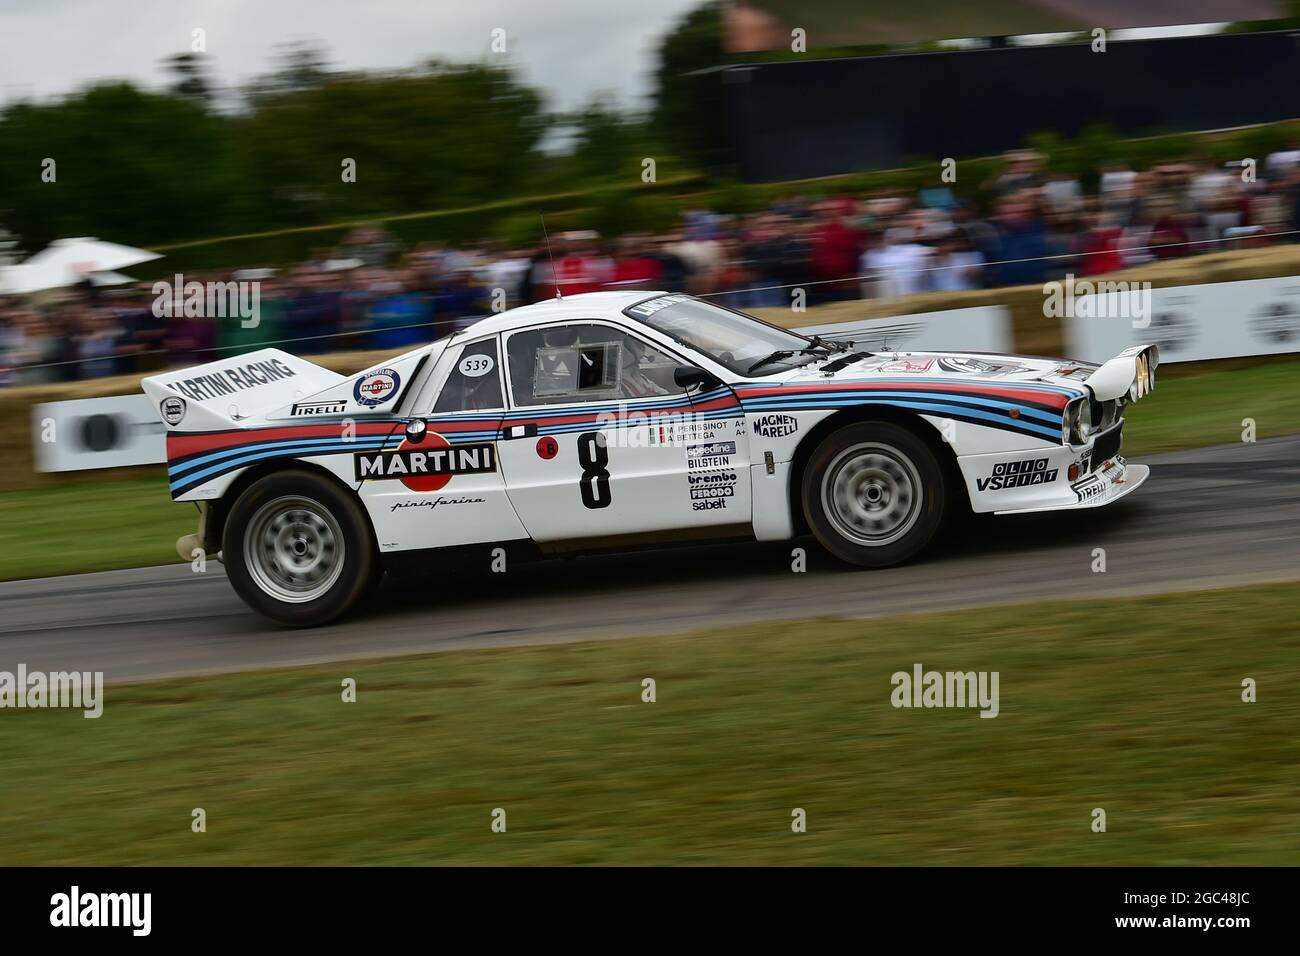 Lancia Rallye 037, Fondazione Gino Macaluso per L'Auto Storica, The Maestros - Motorsport's Great All-Rounders, Goodwood Festival of Speed, Goodwood H Stockfoto